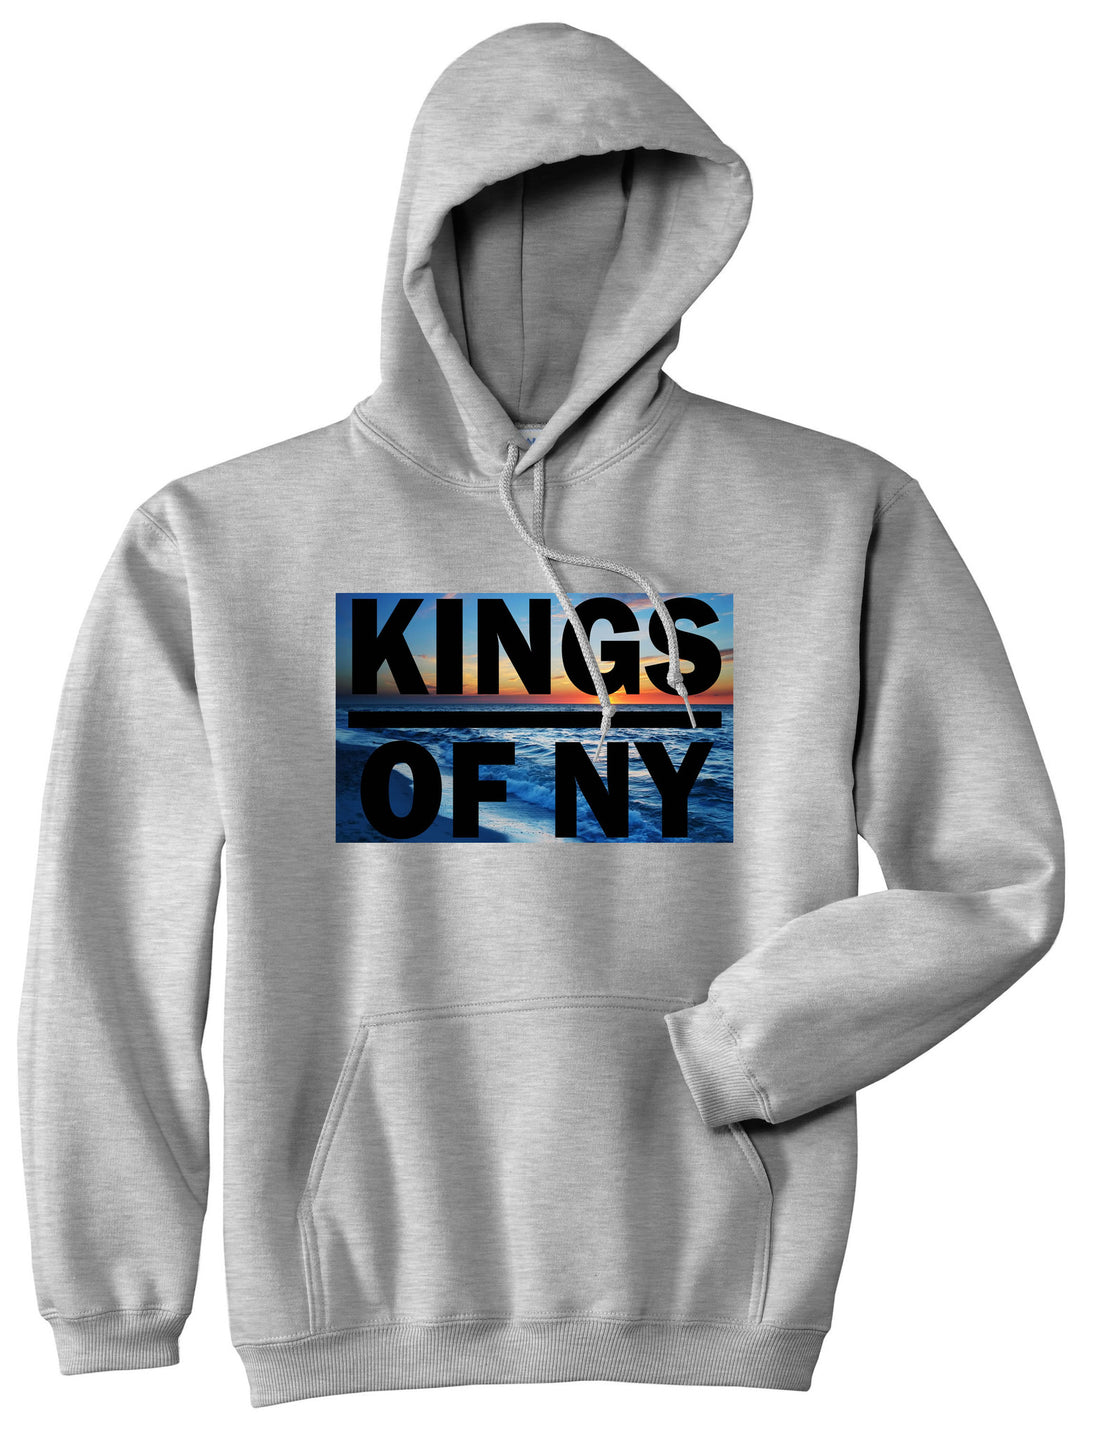 Sunset Logo Pullover Hoodie Hoody in Grey by Kings Of NY